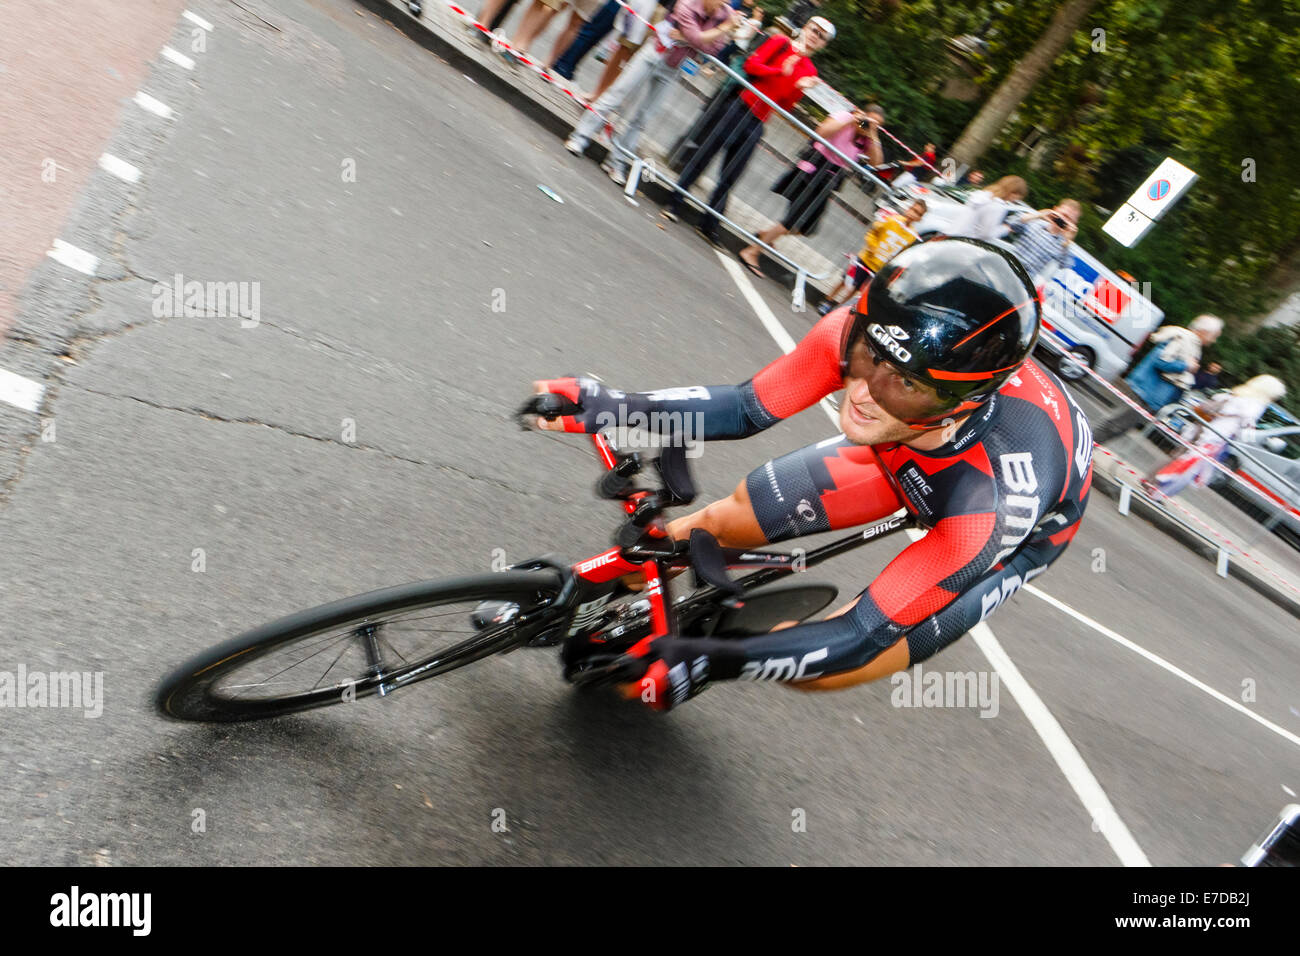 London, UK. 14th September 2014. British rider Stephen Cummings of team BMC competes in the individual time trial section of Stage 8 of the Tour of Britain cycle race in central London. Stock Photo